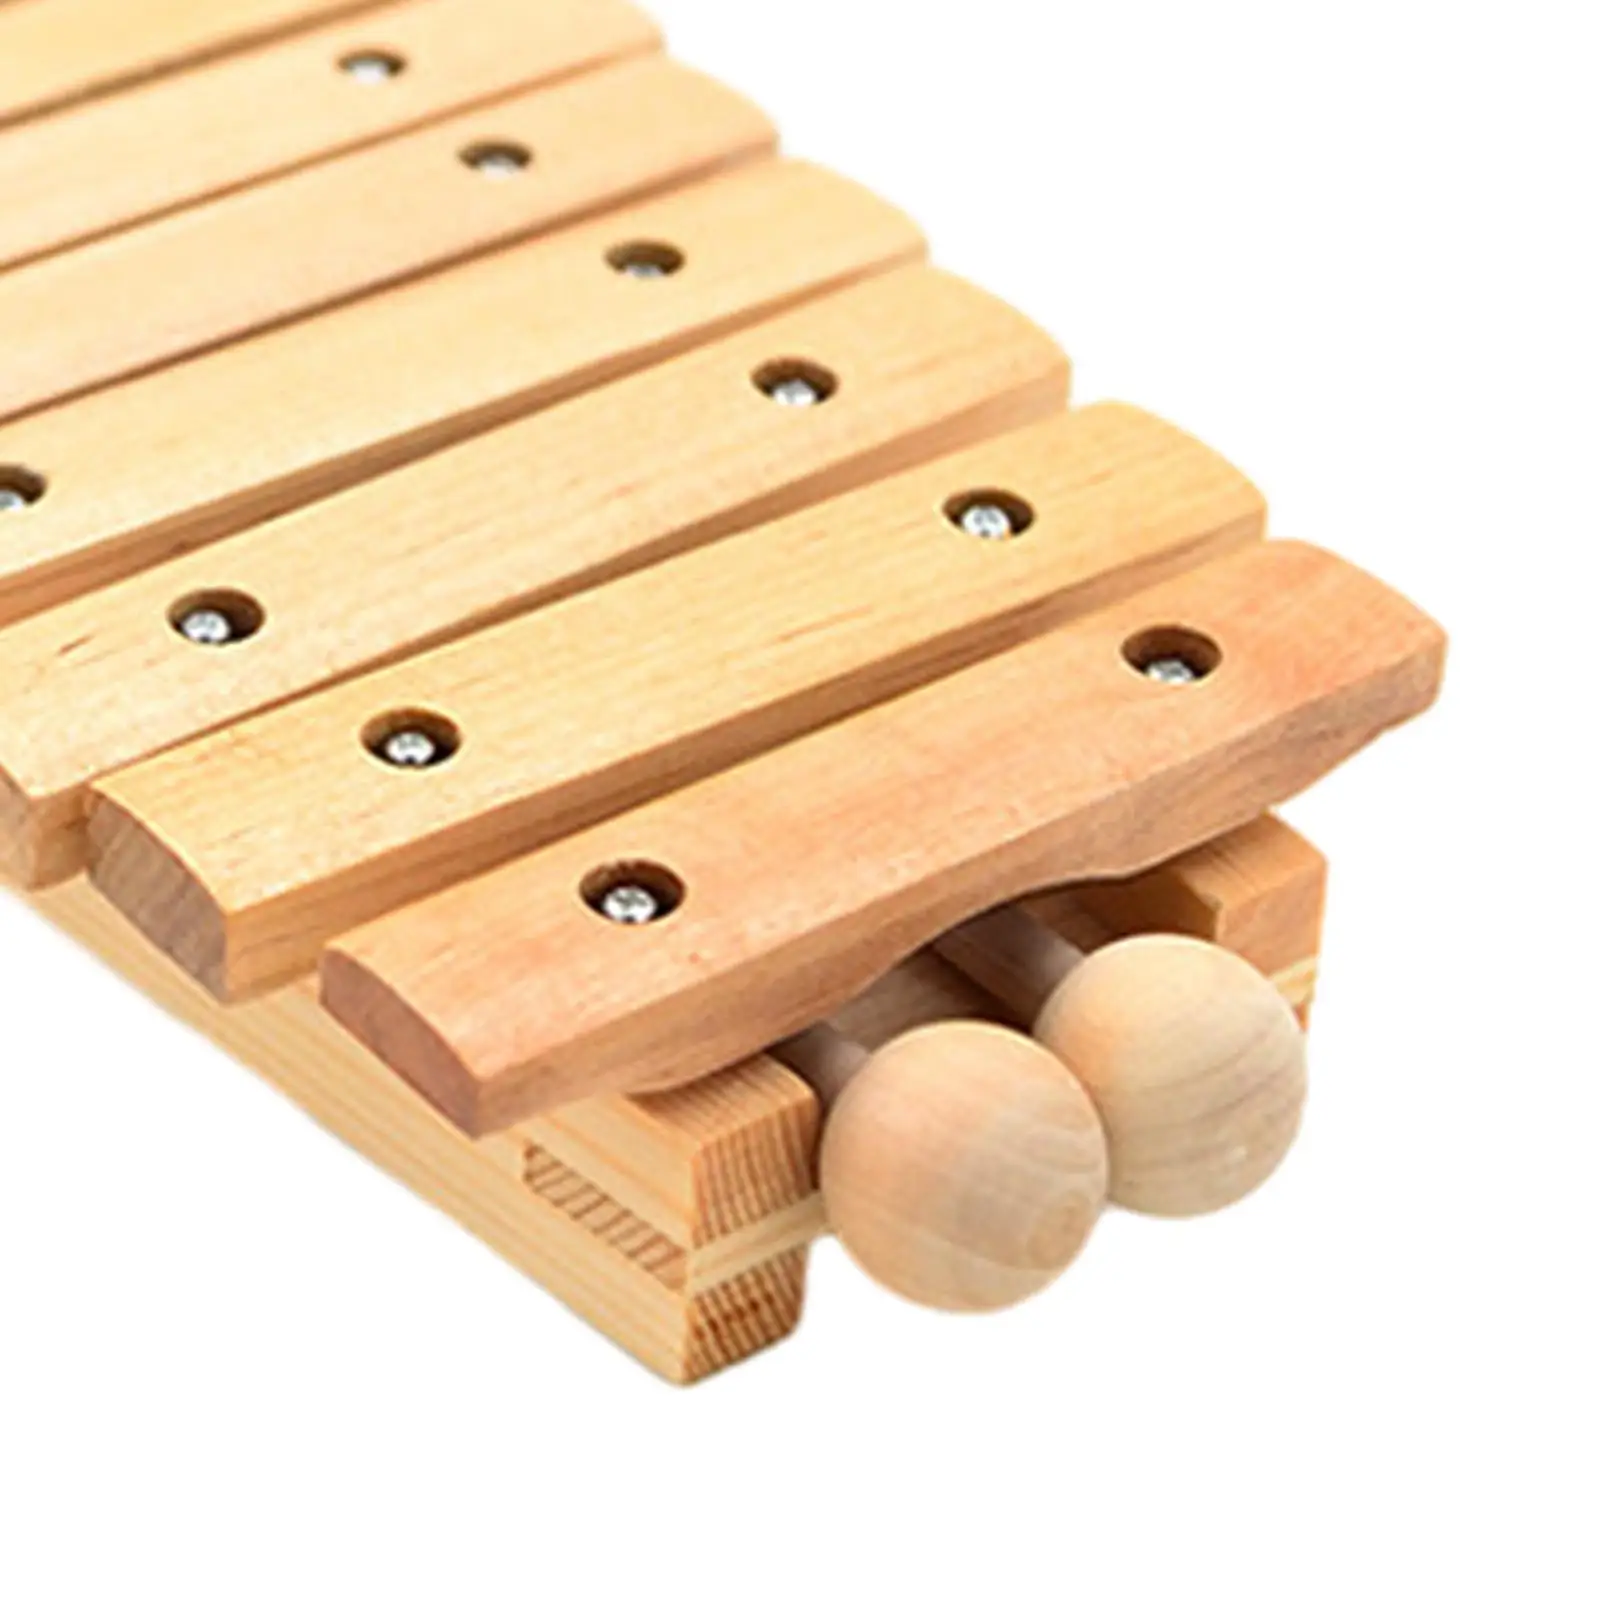 13 Note Wood Xylophone Music Enlightenment Hand Percussion Montessori for Music Lessons Concert School Orchestras Outside Home